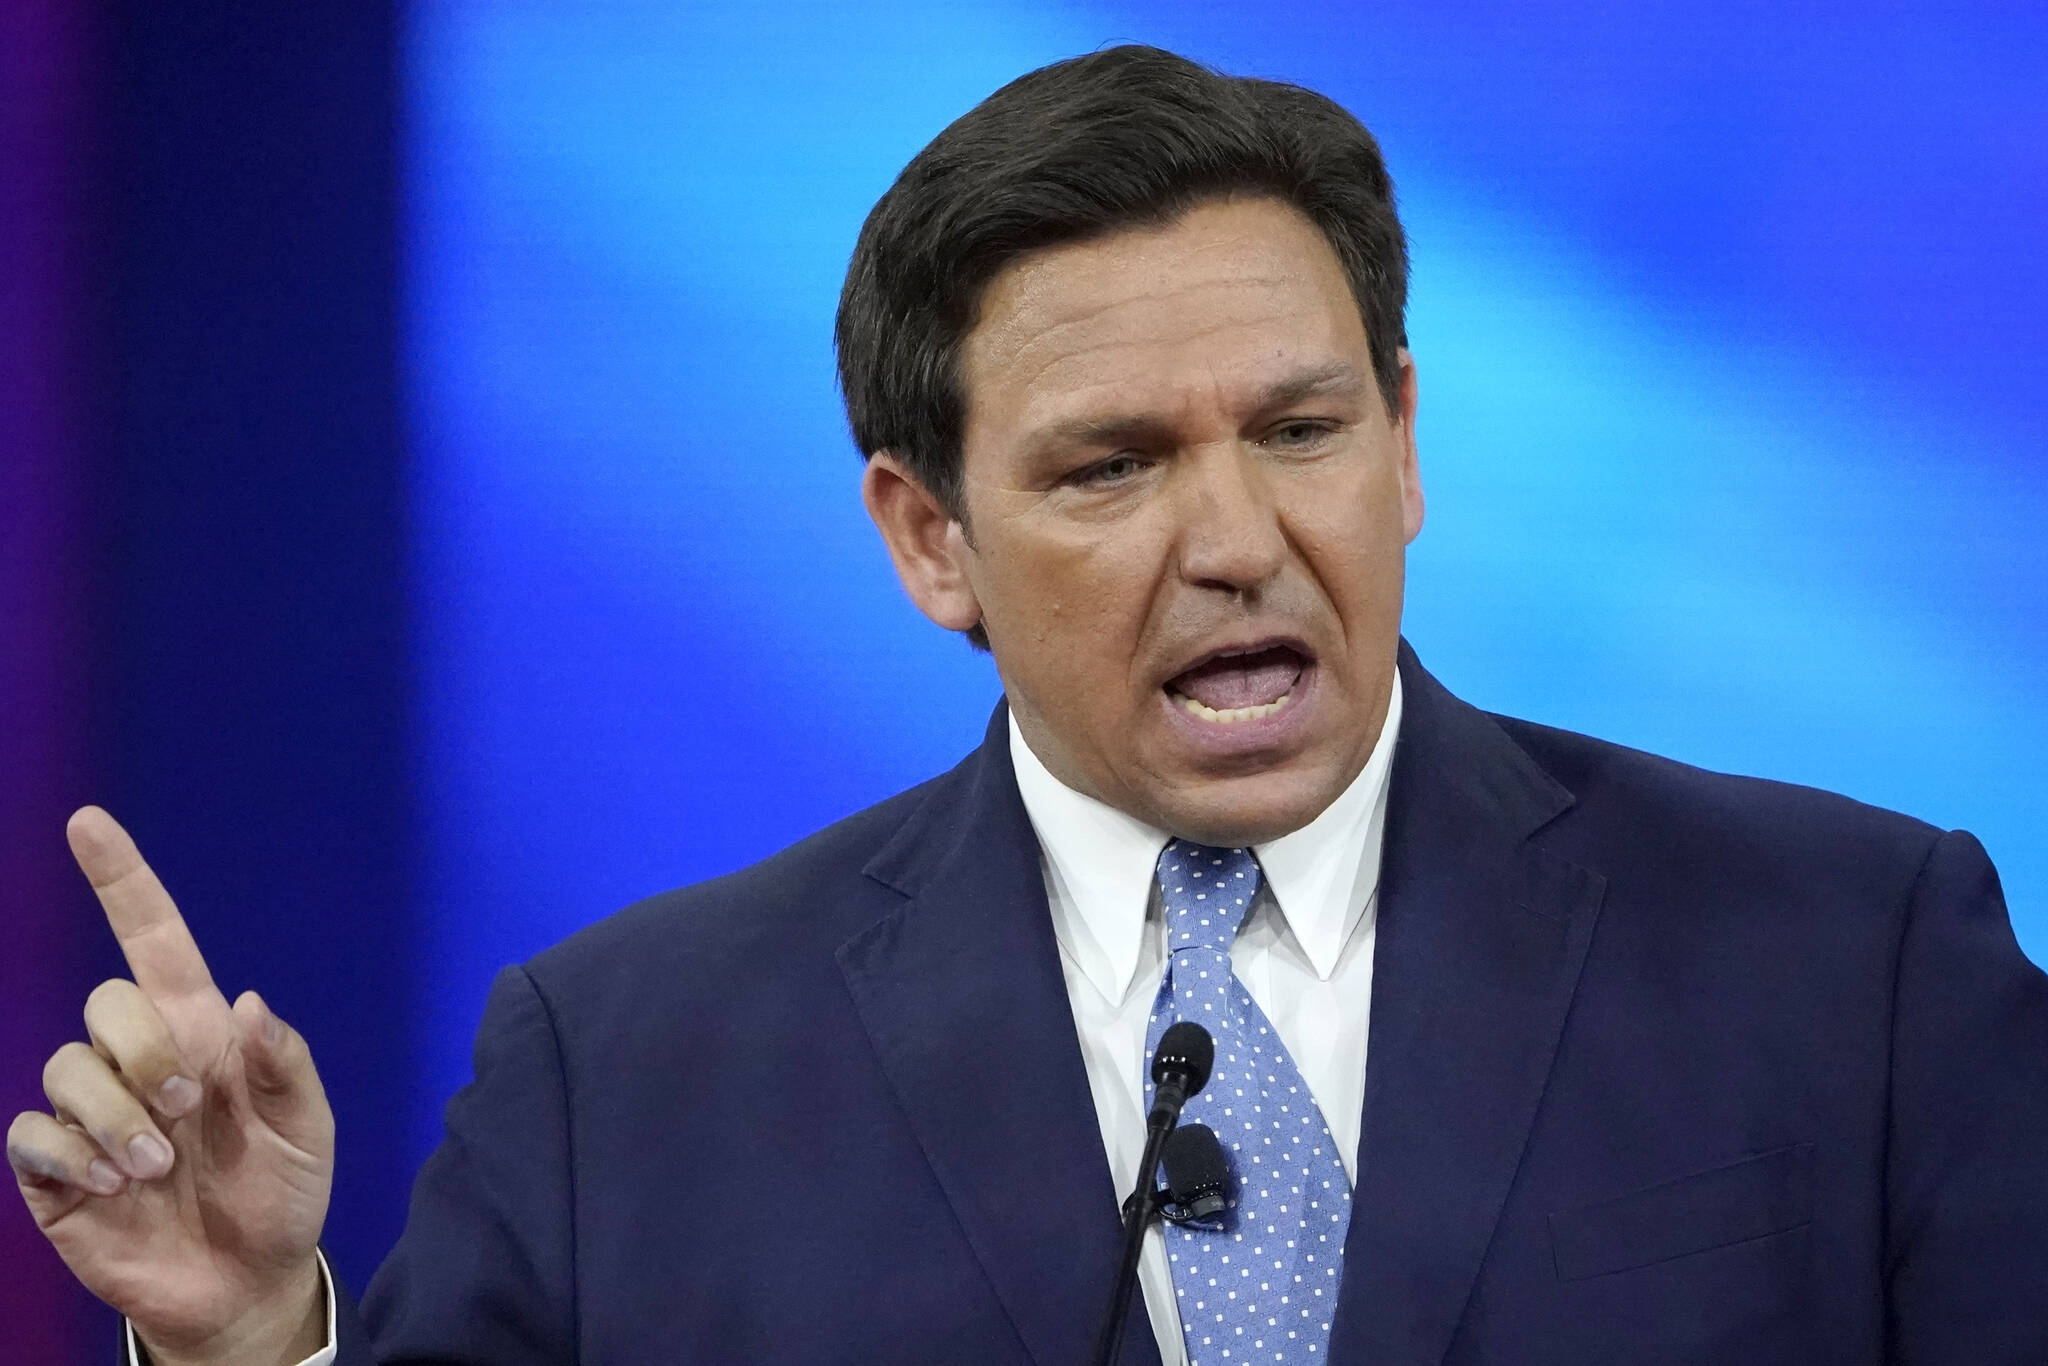 Florida Gov. Ron DeSantis speaks at the Conservative Political Action Conference (CPAC), Feb. 24, 2022, in Orlando, Fla. DeSantis has filed a declaration of candidacy for president, entering the 2024 race as Donald Trump’s top GOP rival (AP Photo / John Raoux)